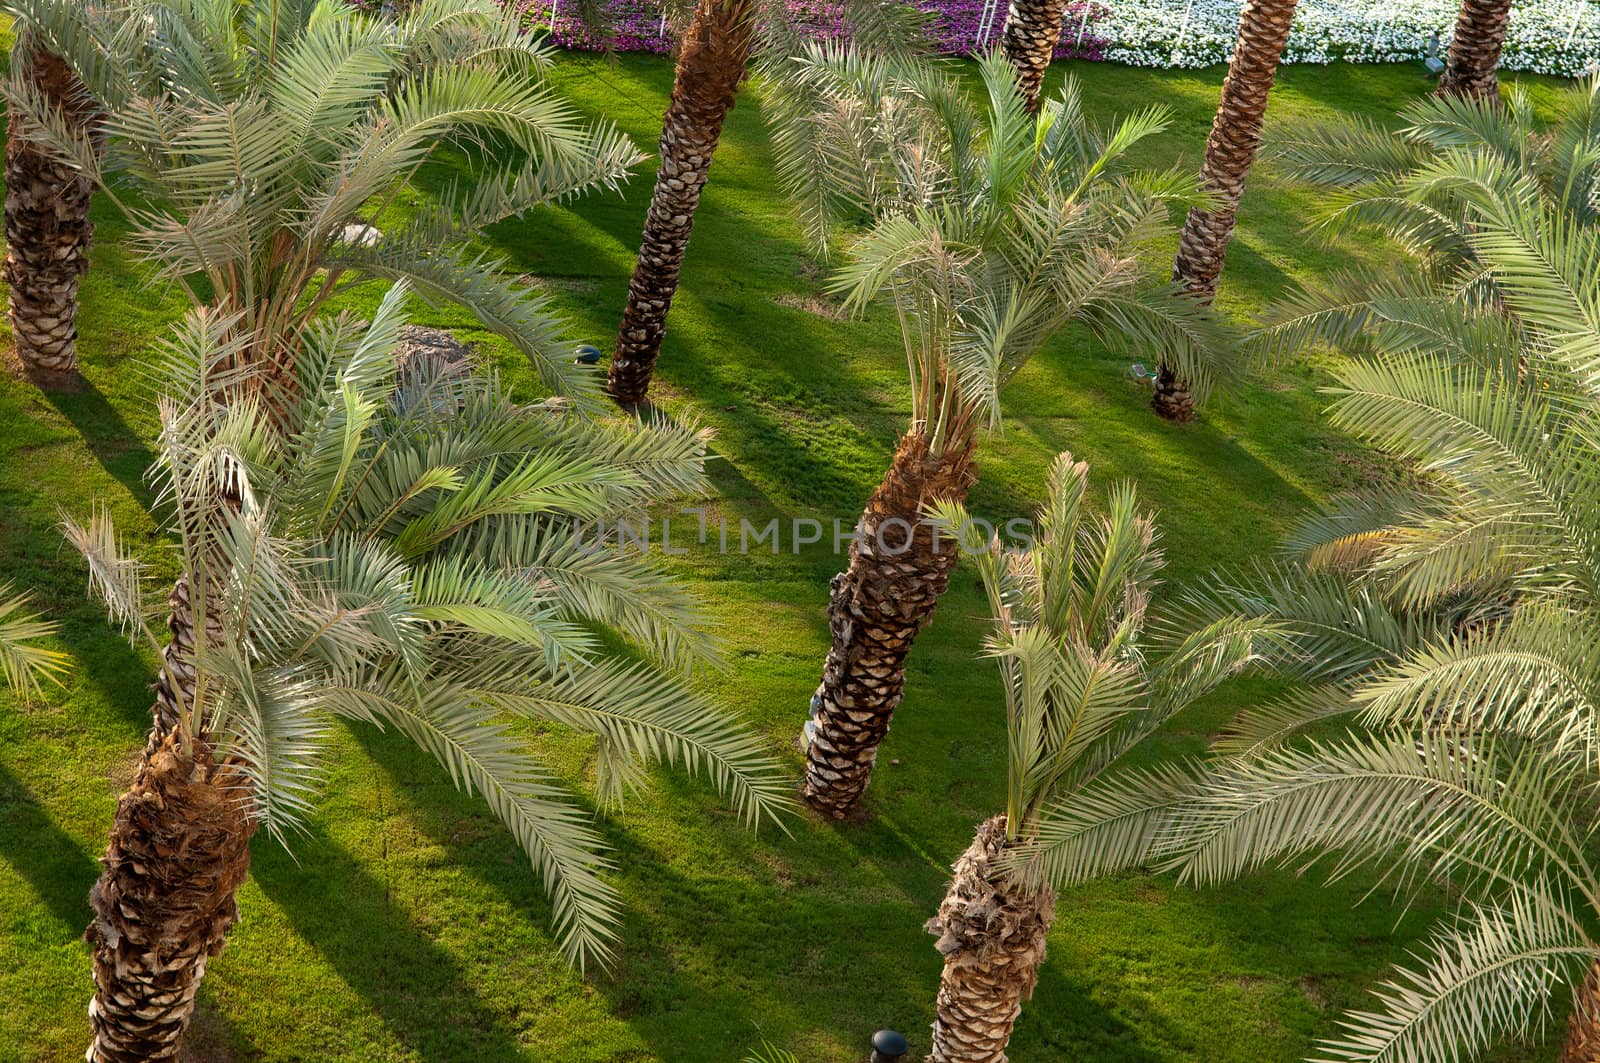 Date palms by ben44